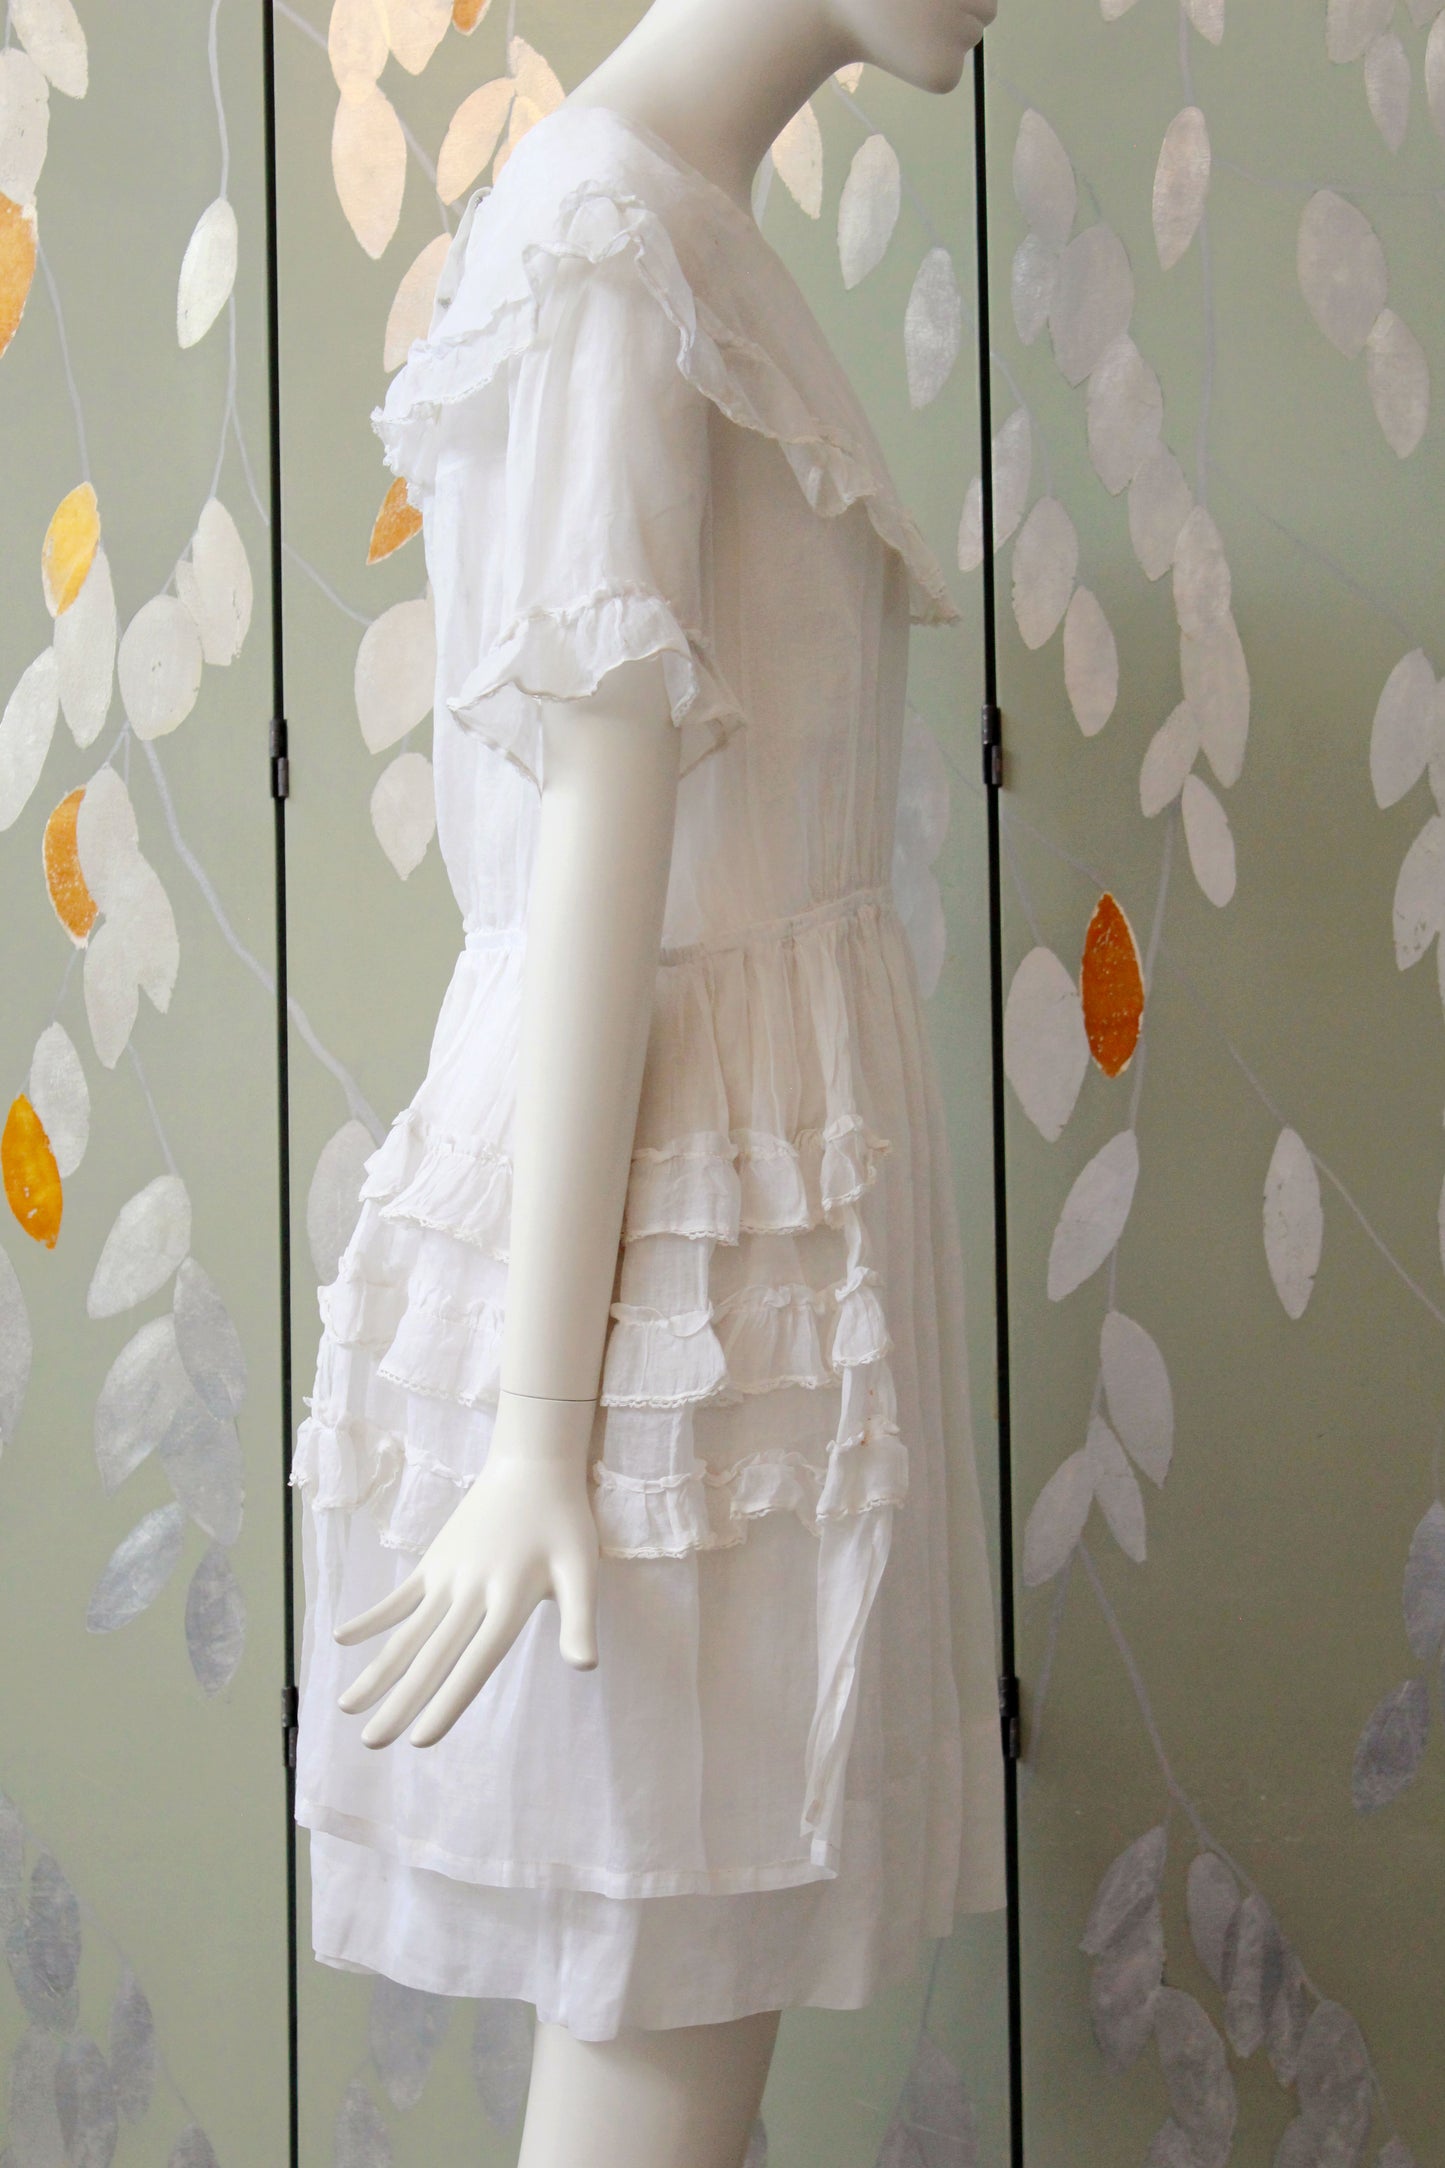 Mid 1920s White Ruffle Collar Day Dress, Size S, White Summer Dress, Antique Day Dress